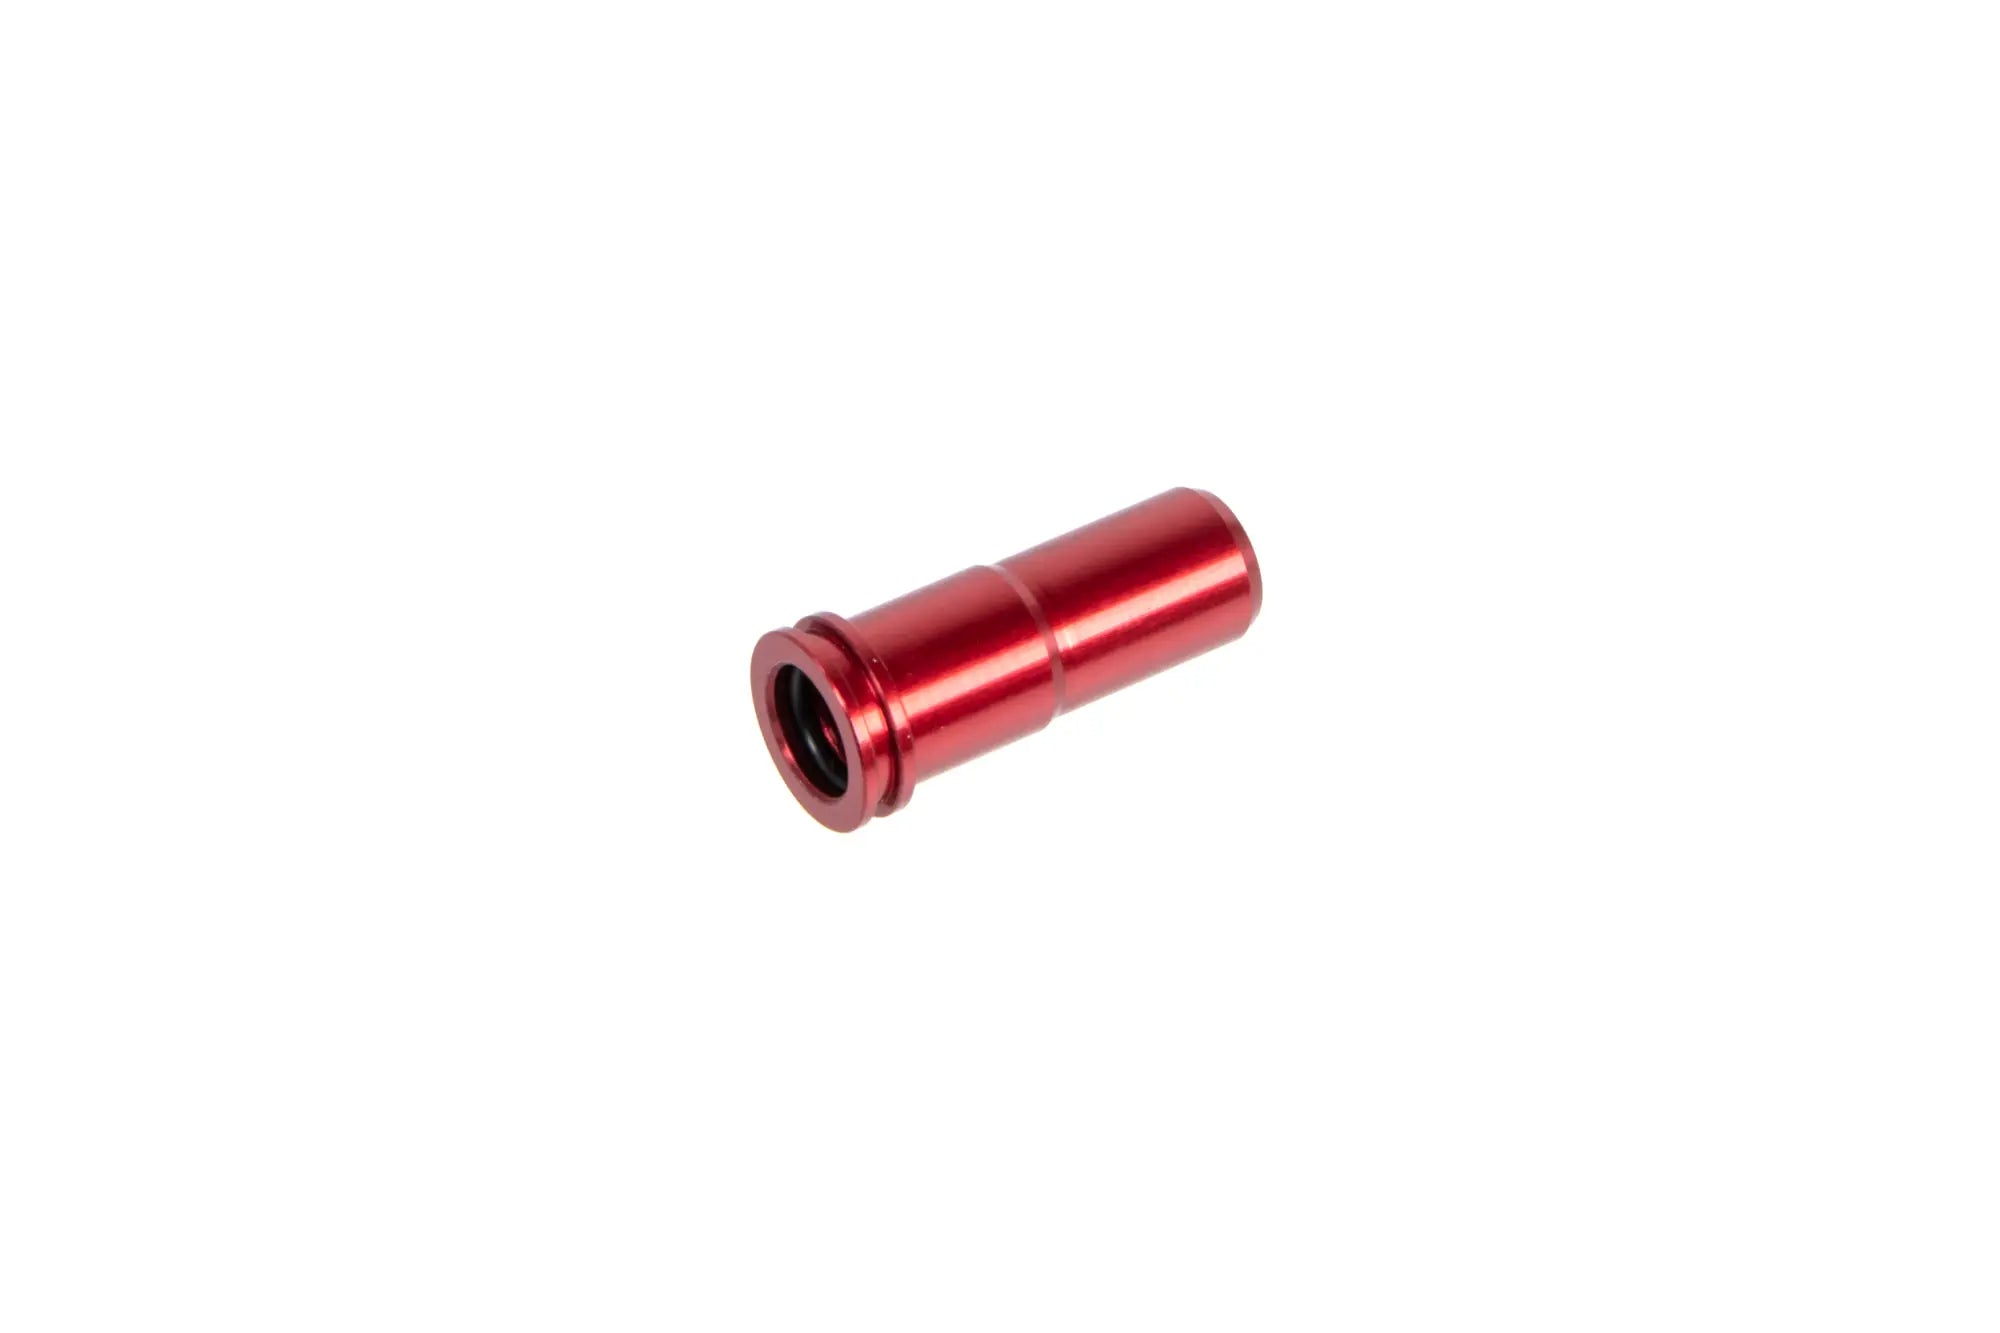 Sealed ERGAL nozzle for M4/AR-15 replicas 21.10mm Red-1